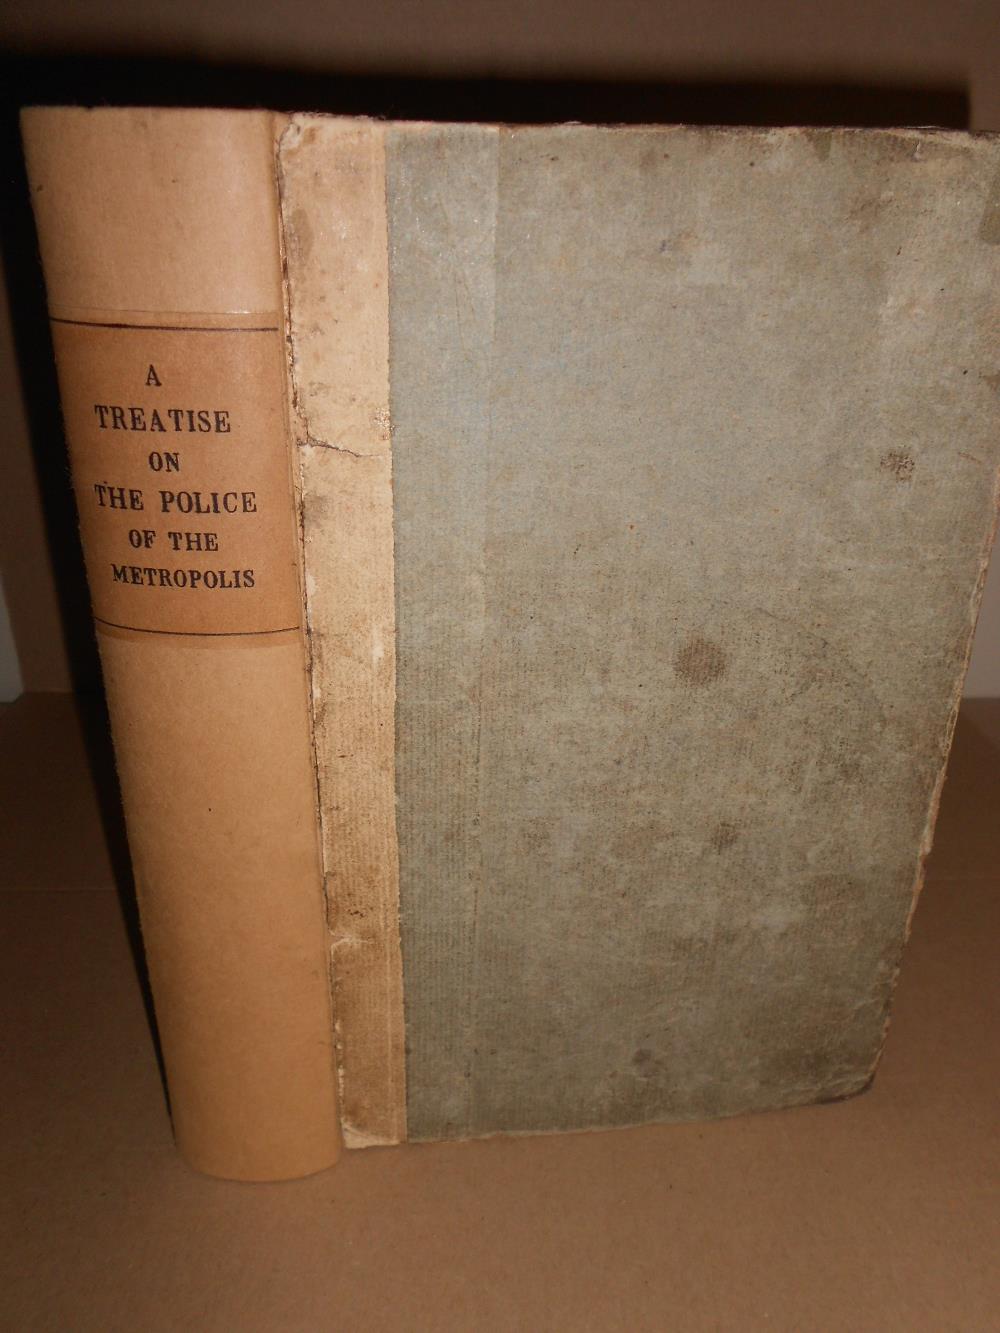 [Colquhoun, Patrick] A Treatise on the Police of the Metropolis, London: C. Dilly, 1797, fourth